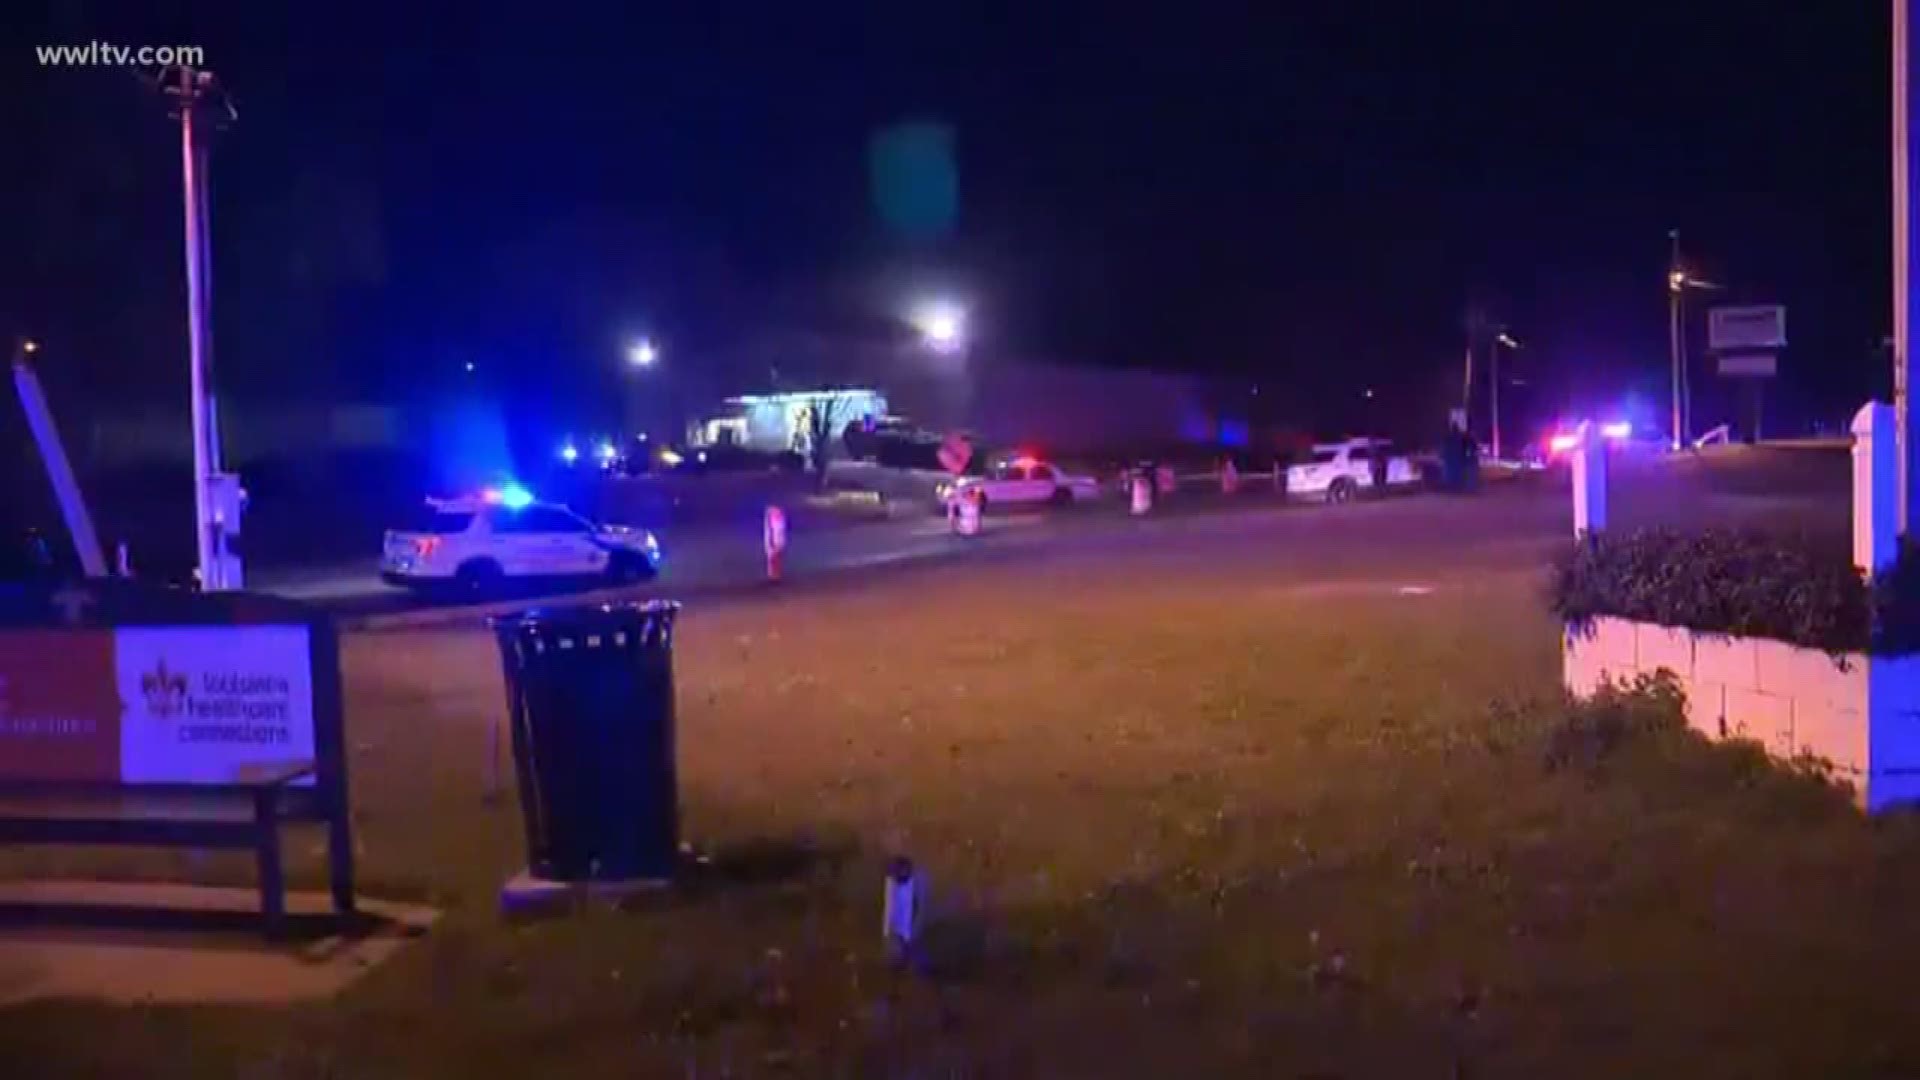 Corporal Marcus Hines tells the Shreveport Times that the officer was headed to work around 8:20 p.m. when she was shot in the Caddo Heights neighborhood